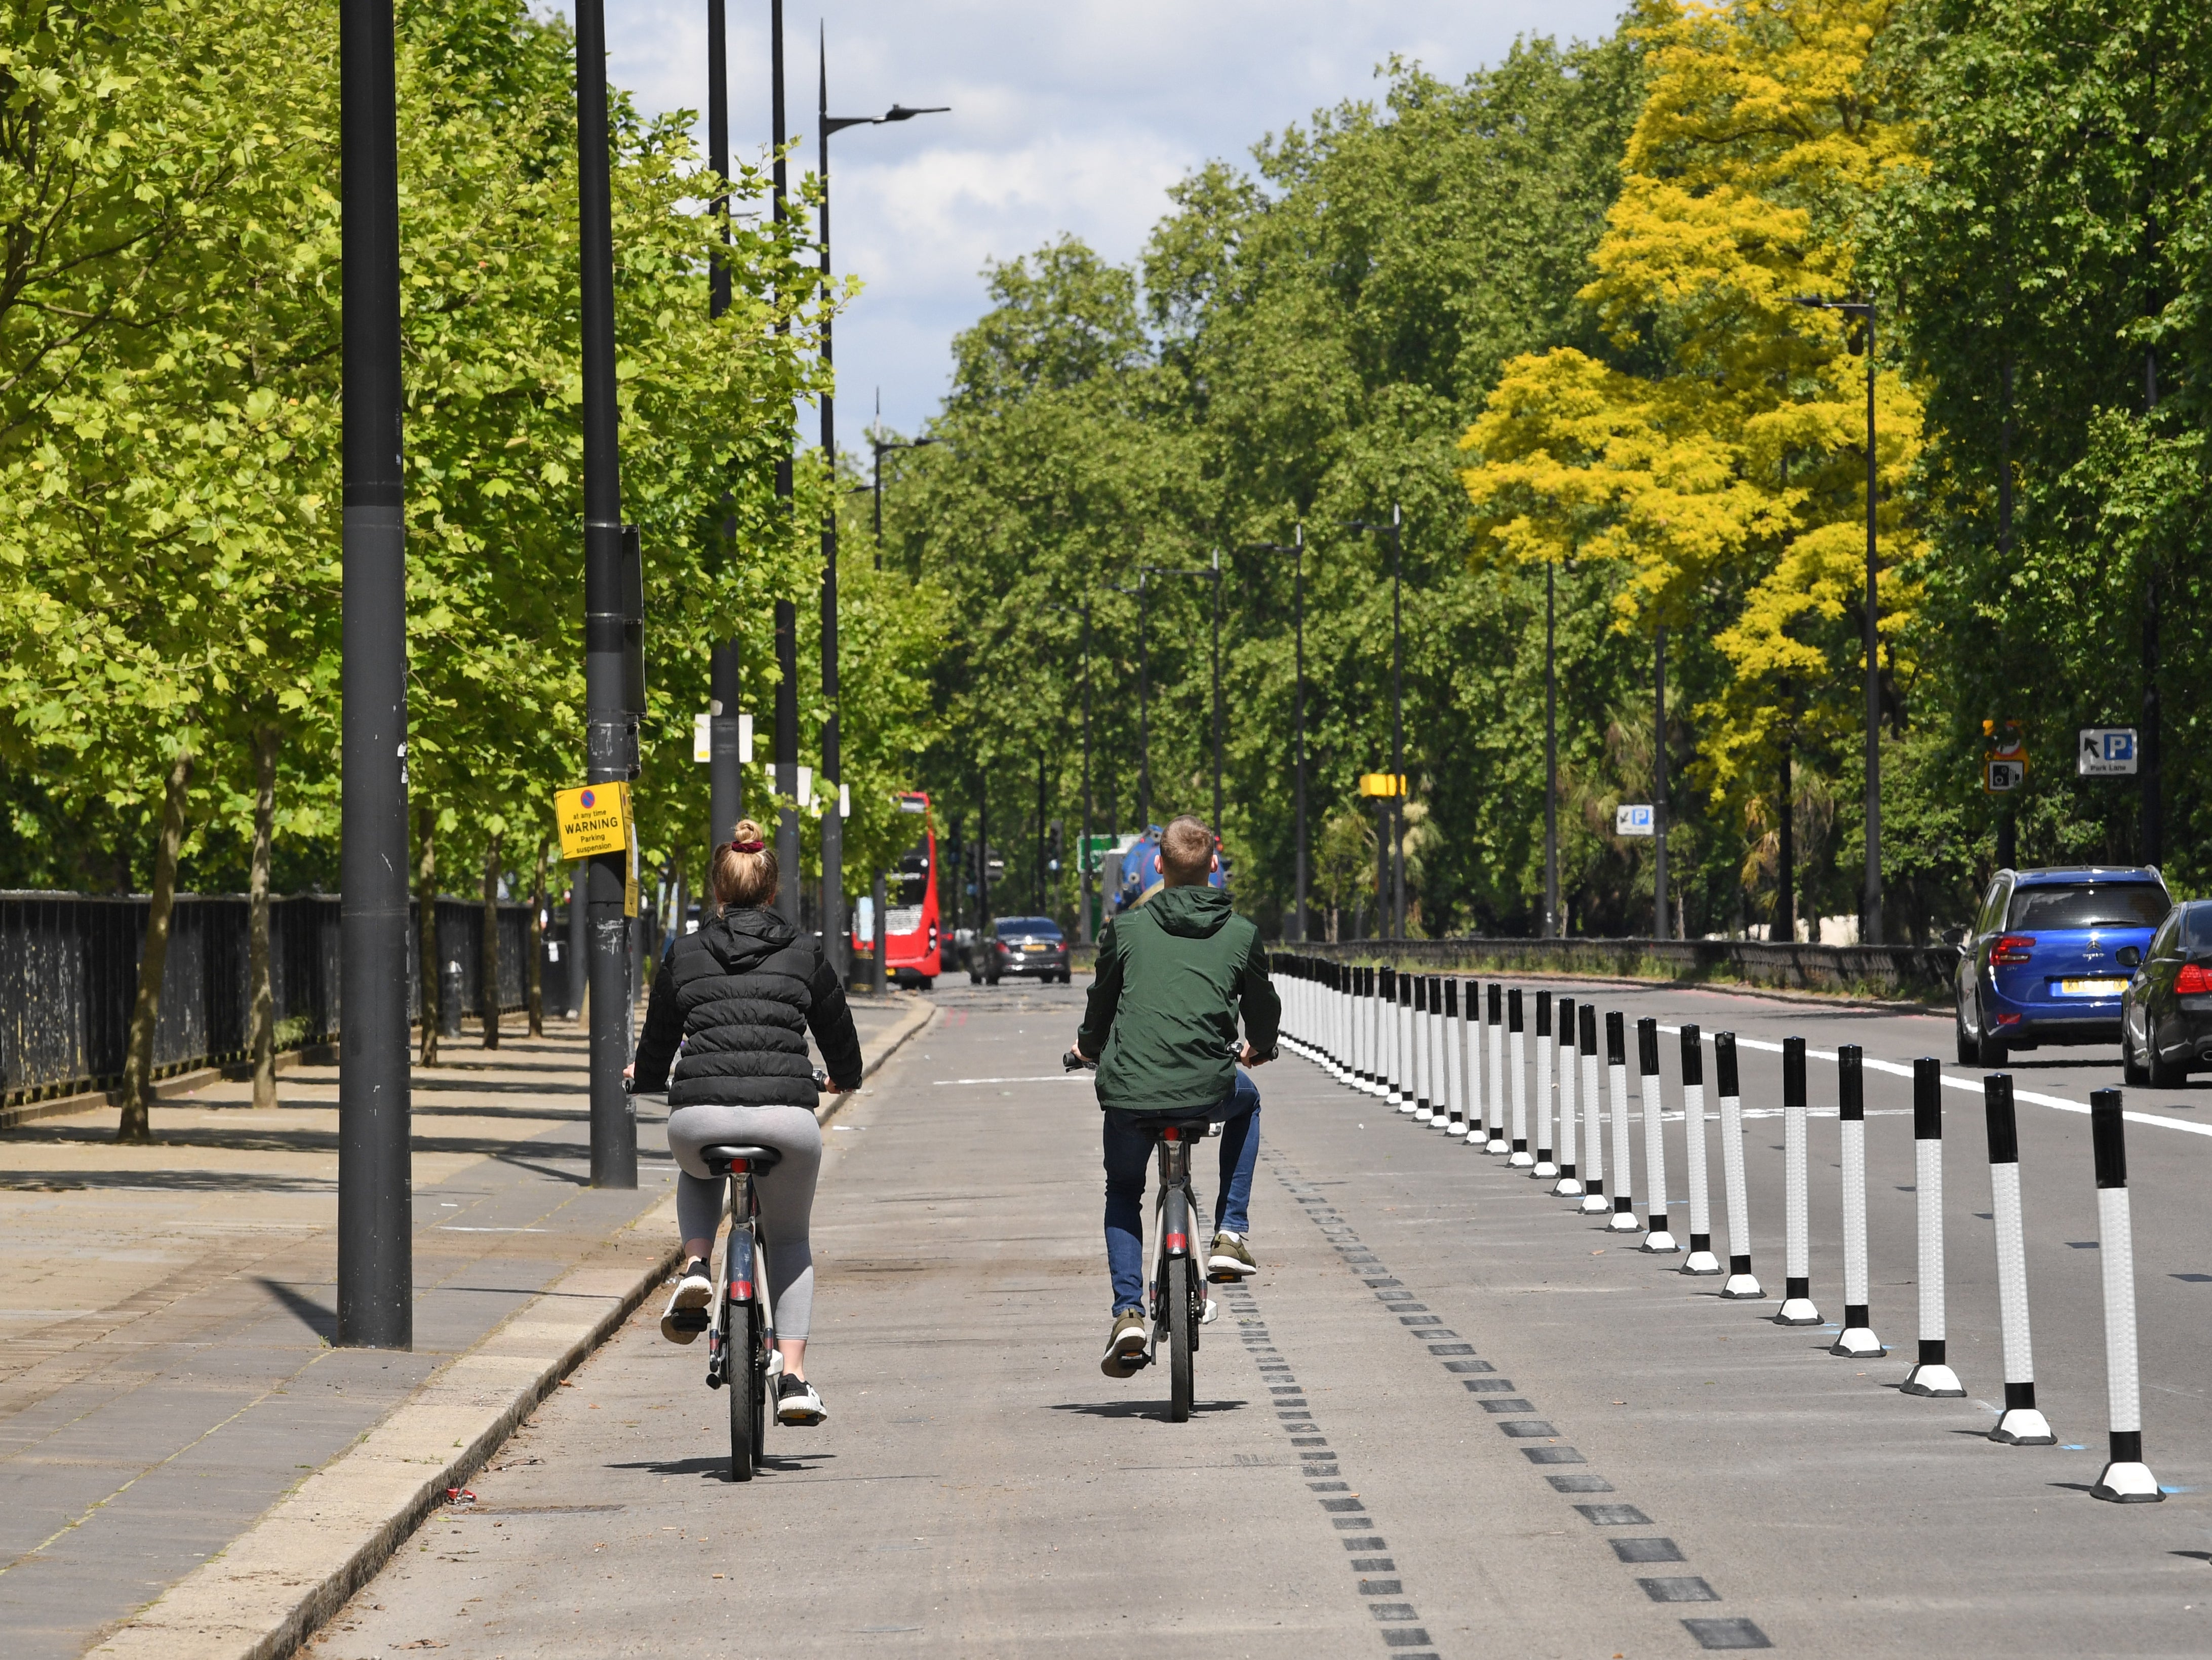 A pop-up cycle lane in Park Lane, London, segregated from the road by wands